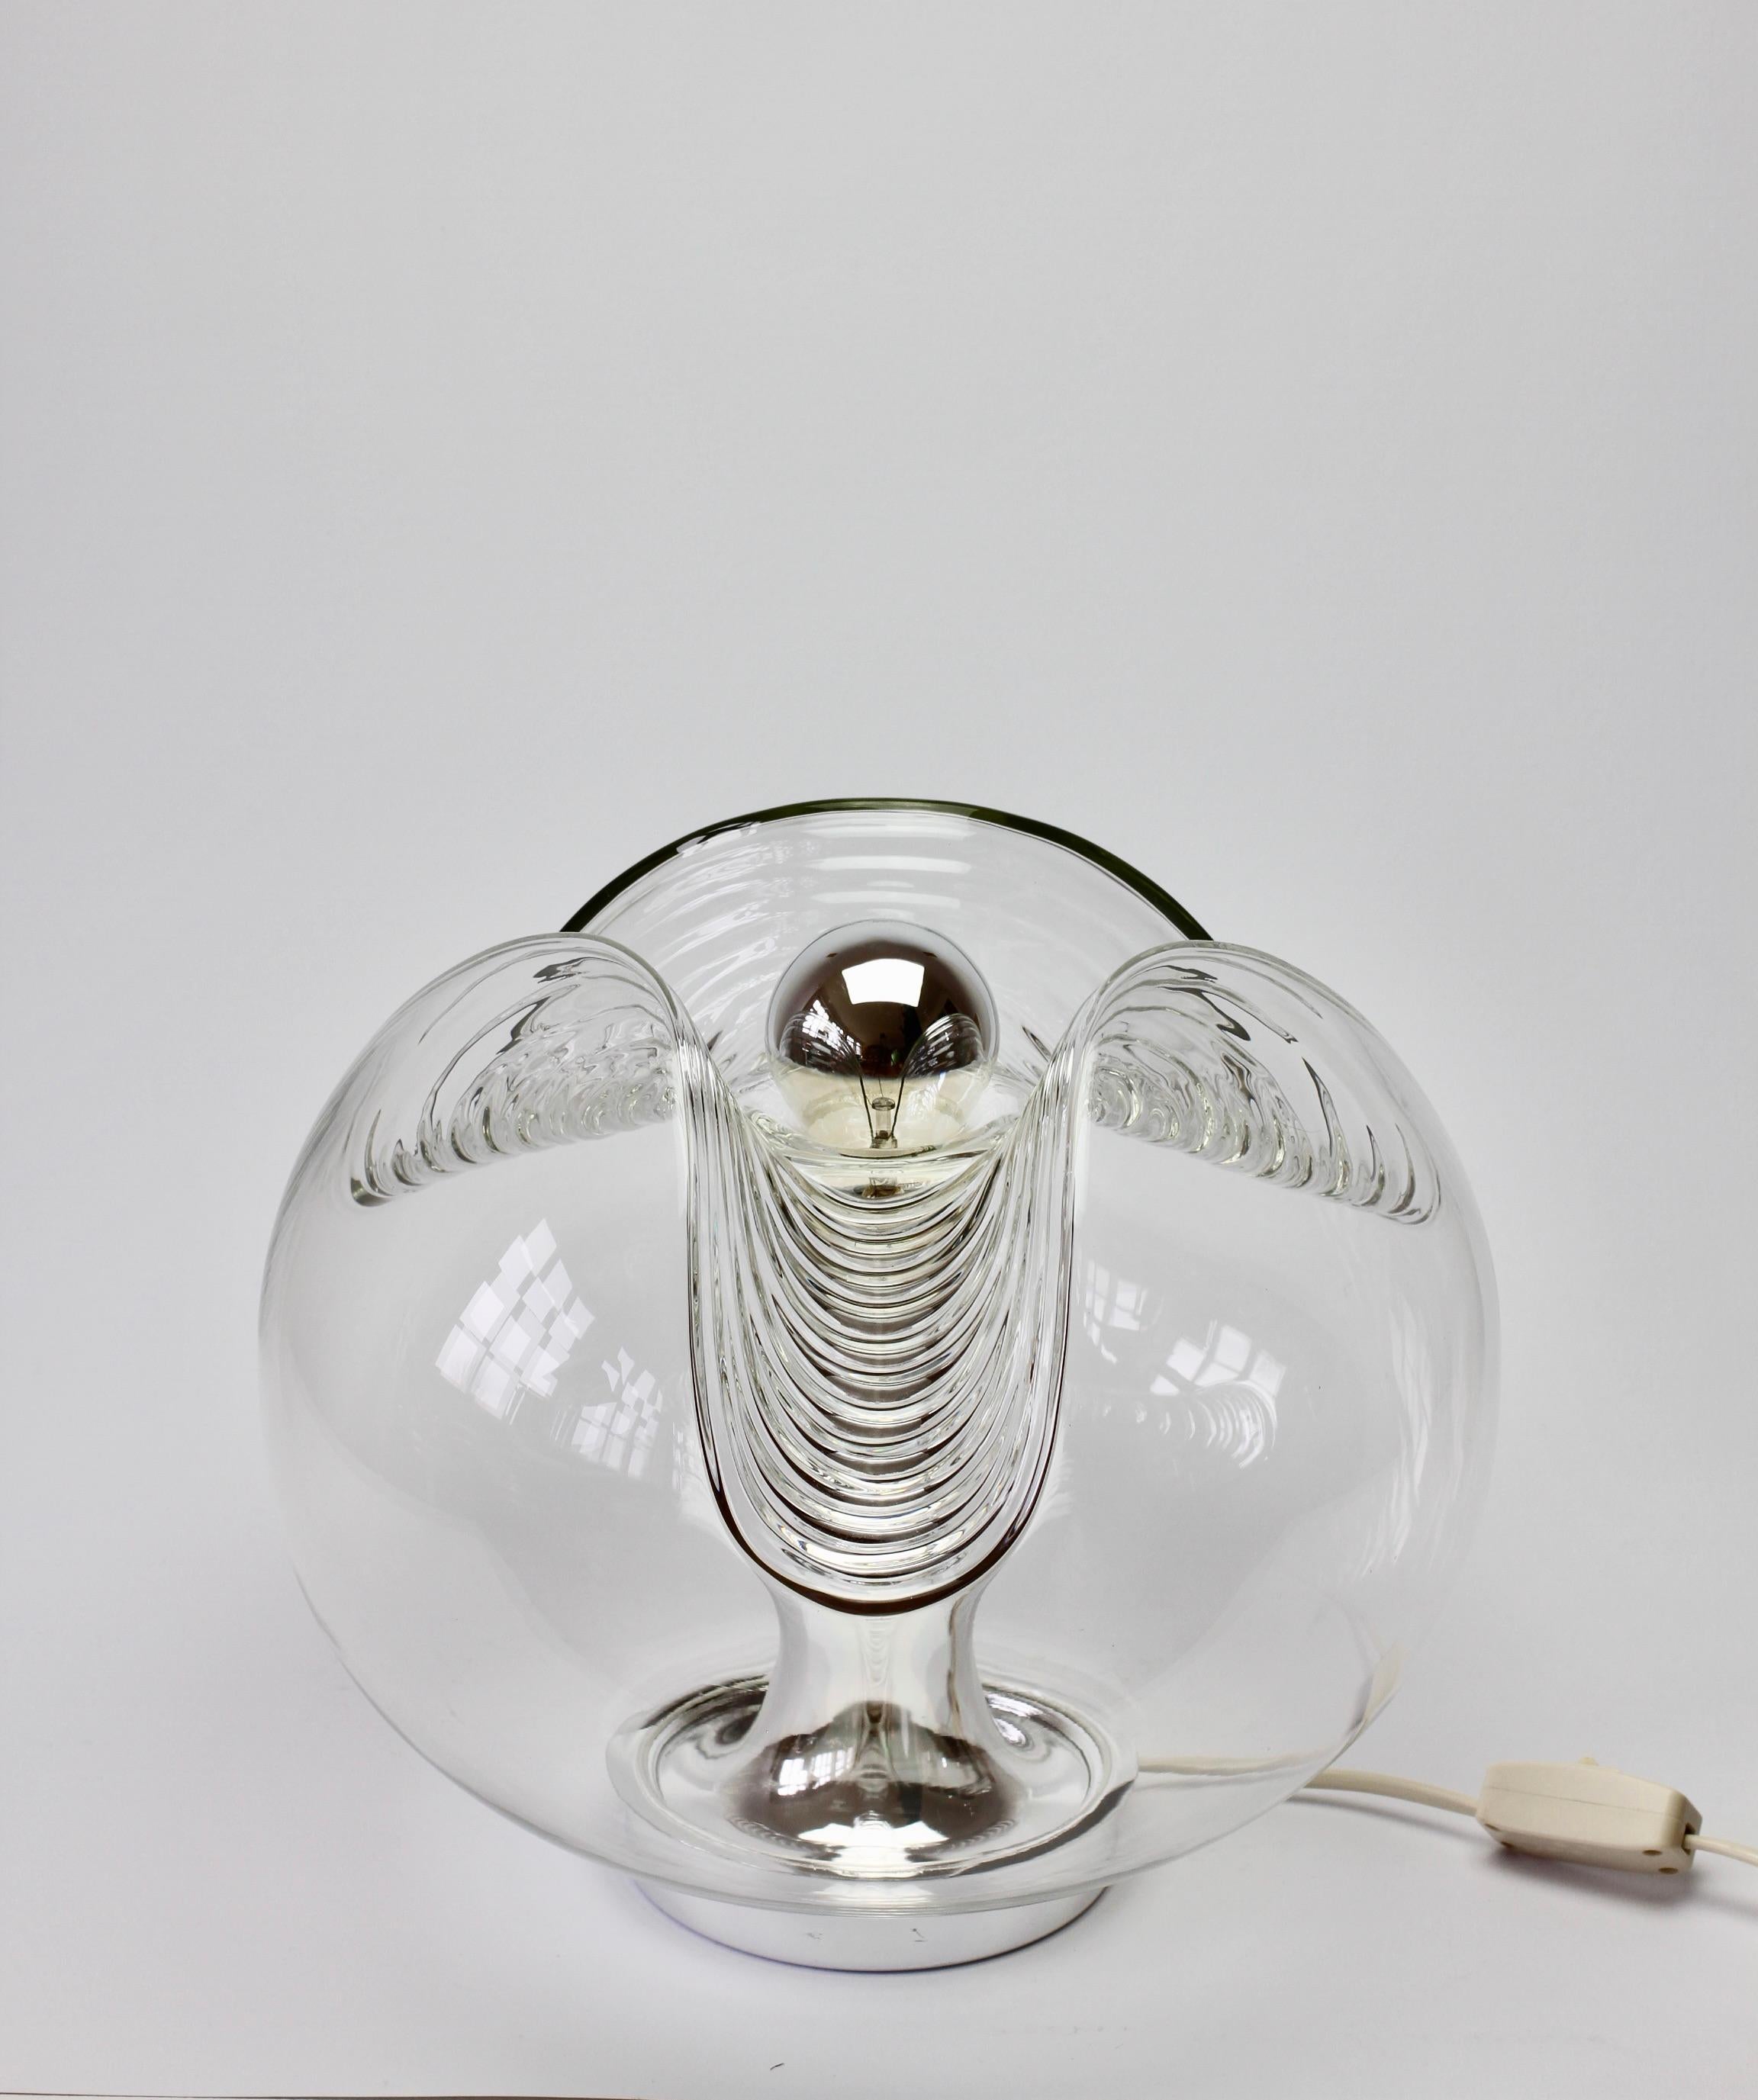 Midcentury vintage table lamp or light by German manufacturer Peill & Putzler in the 1970s. This is an absolutely Classic piece of design, featuring an organic and biomorphic shaped clear glass globe shade with a waved or ribbed moulded bubble form